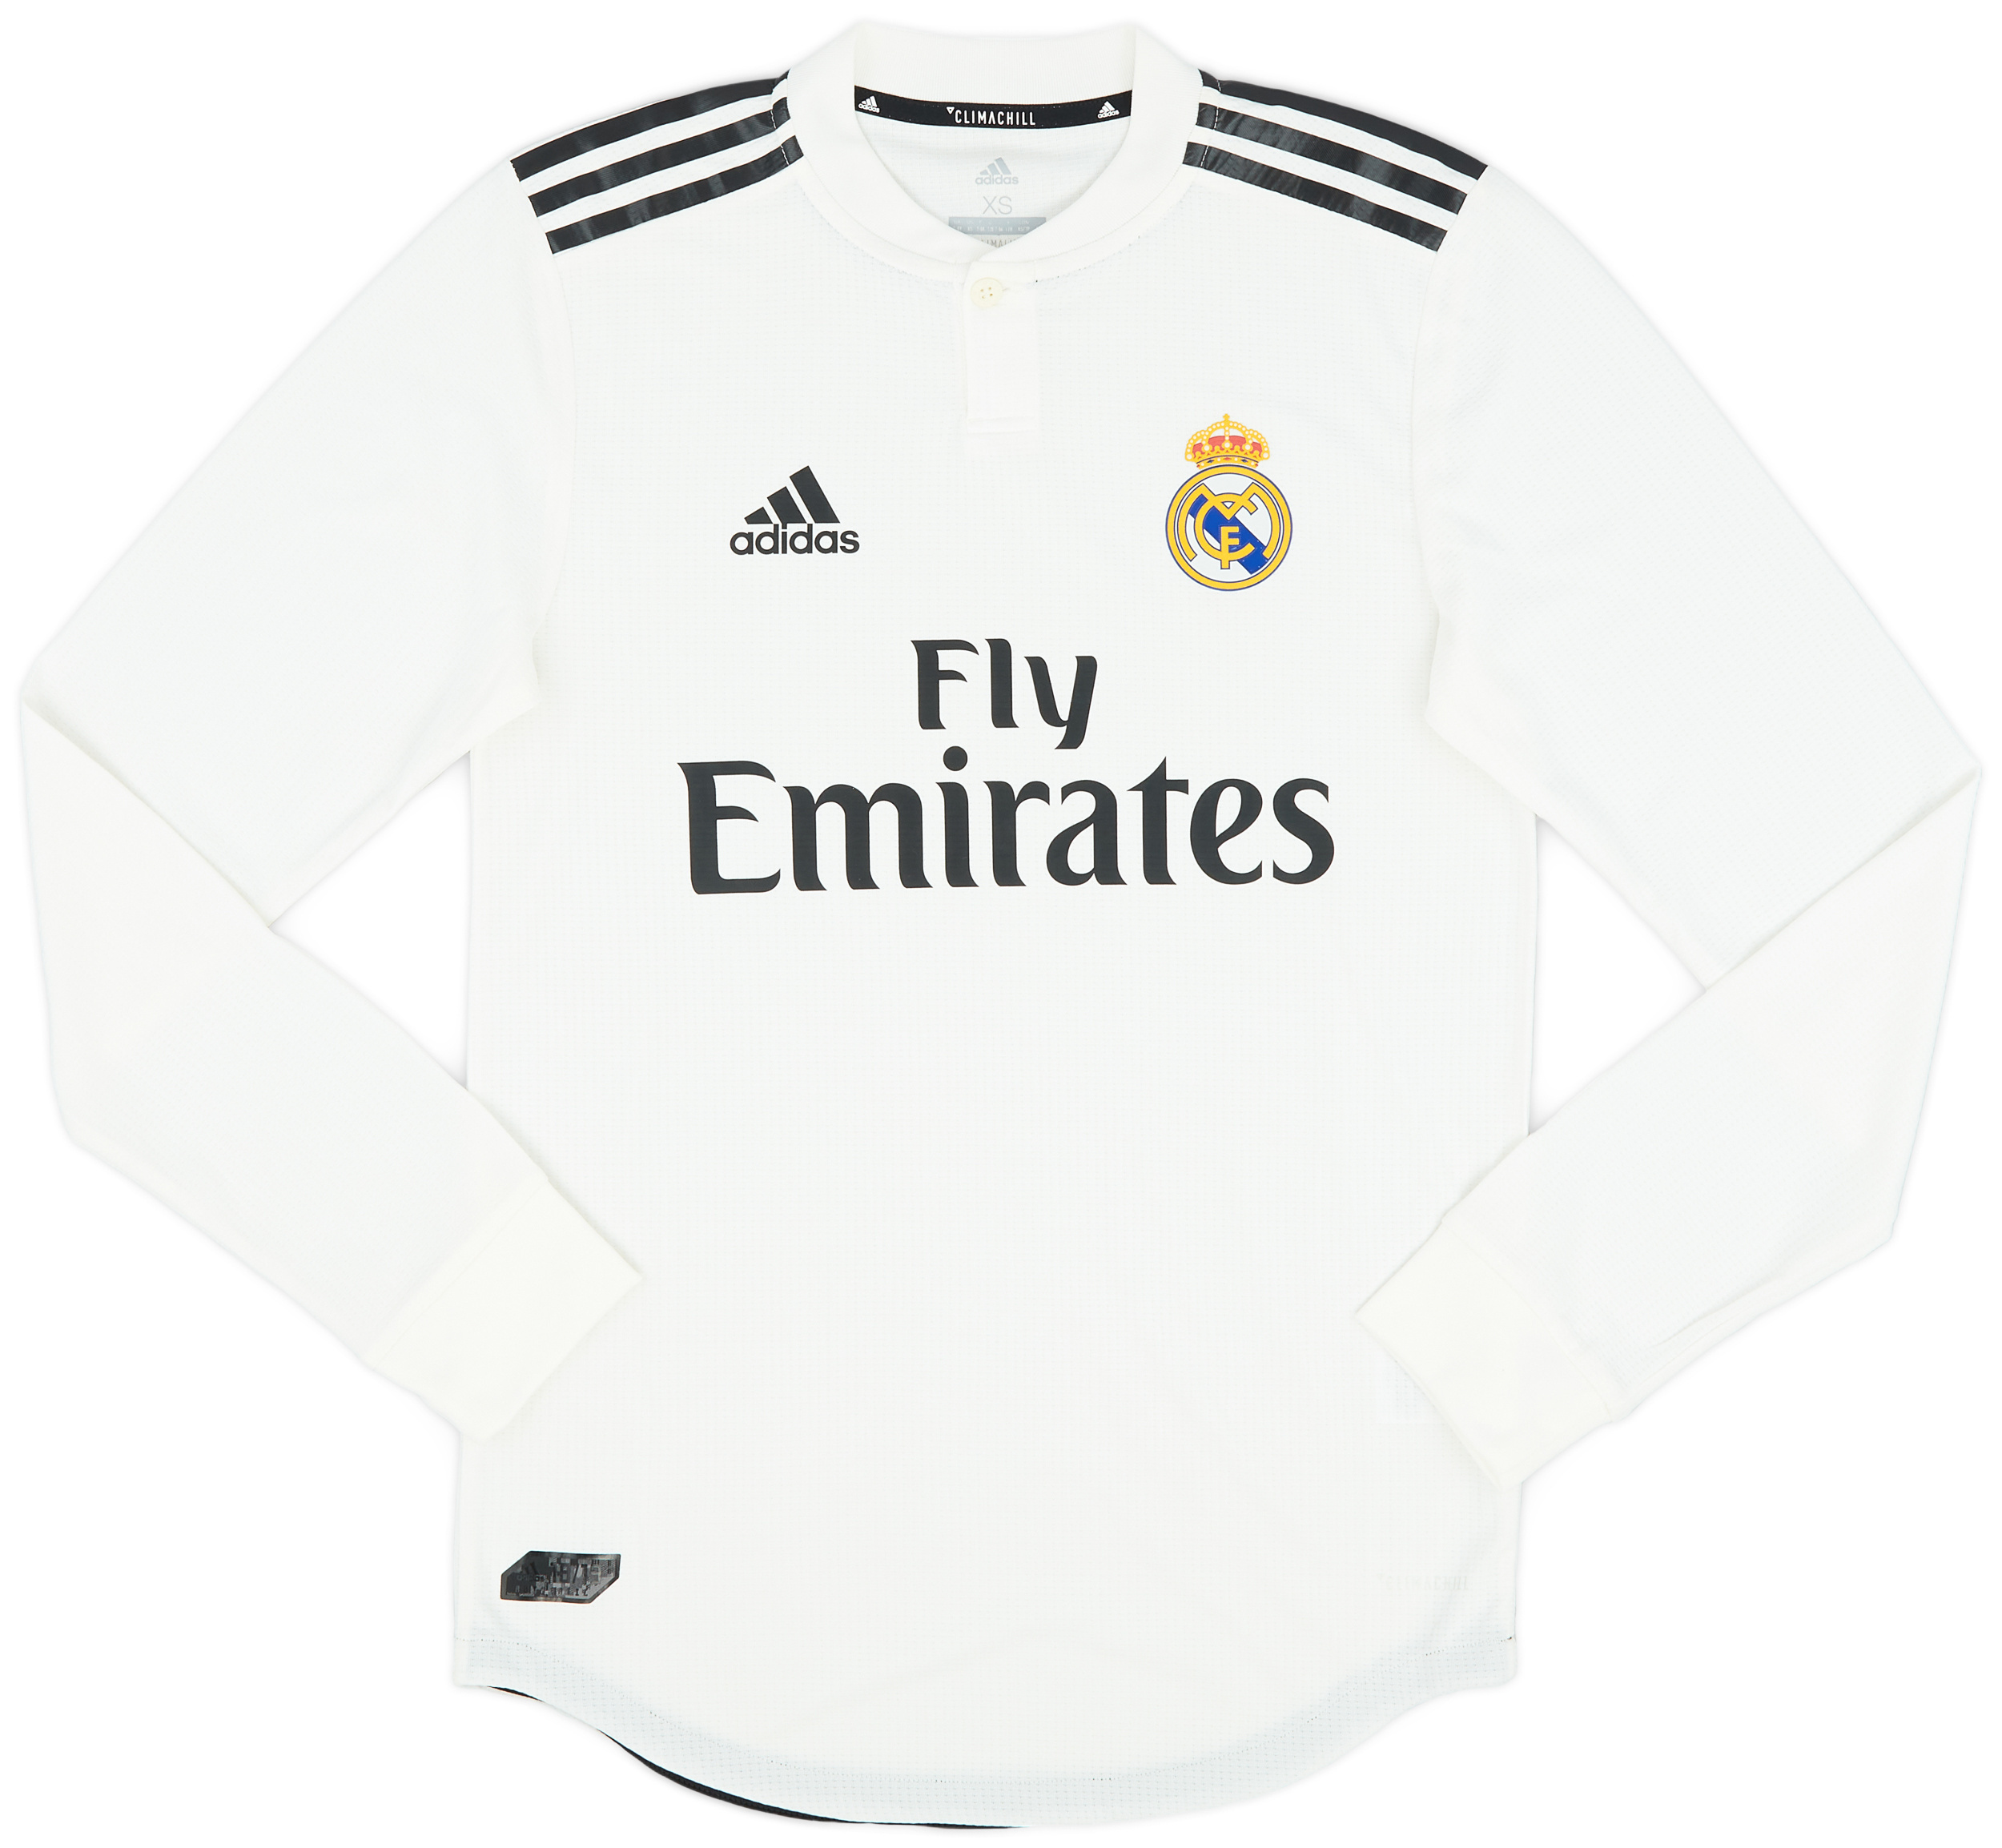 2018-19 Real Madrid Authentic Home Shirt - 9/10 - ()